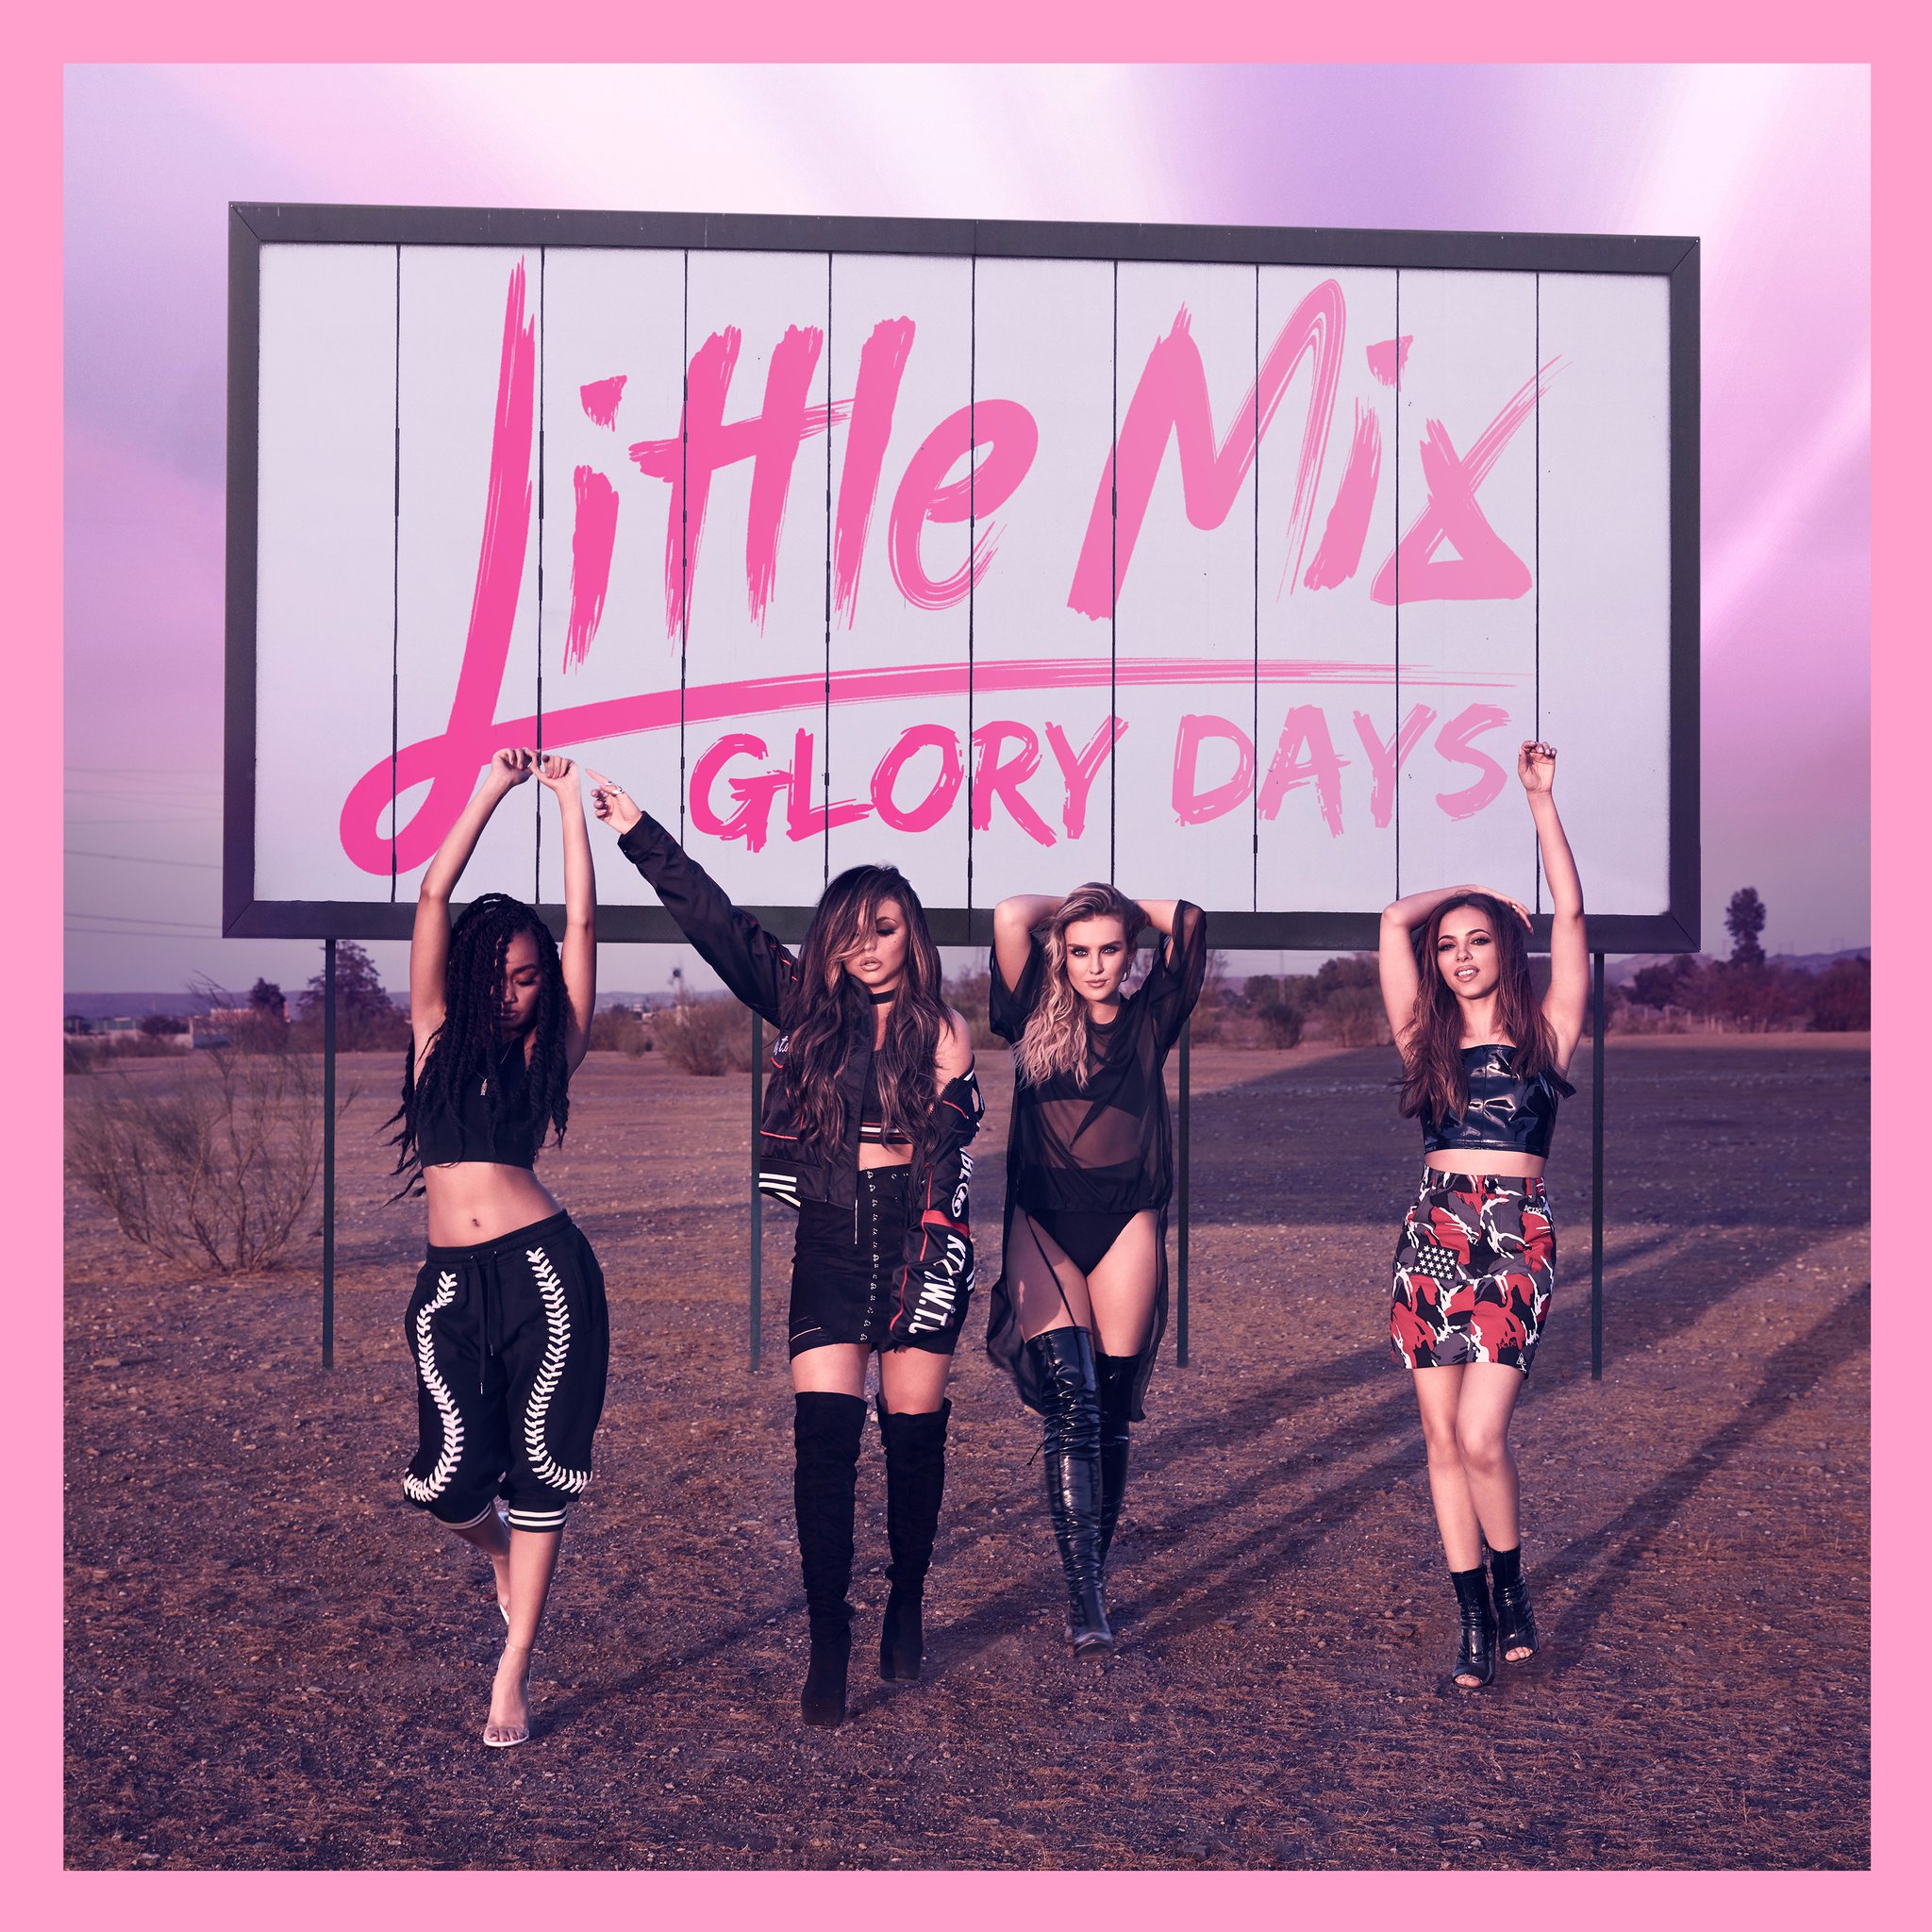 Little Mixs Glory Days Sets New Girl Group Chart Record